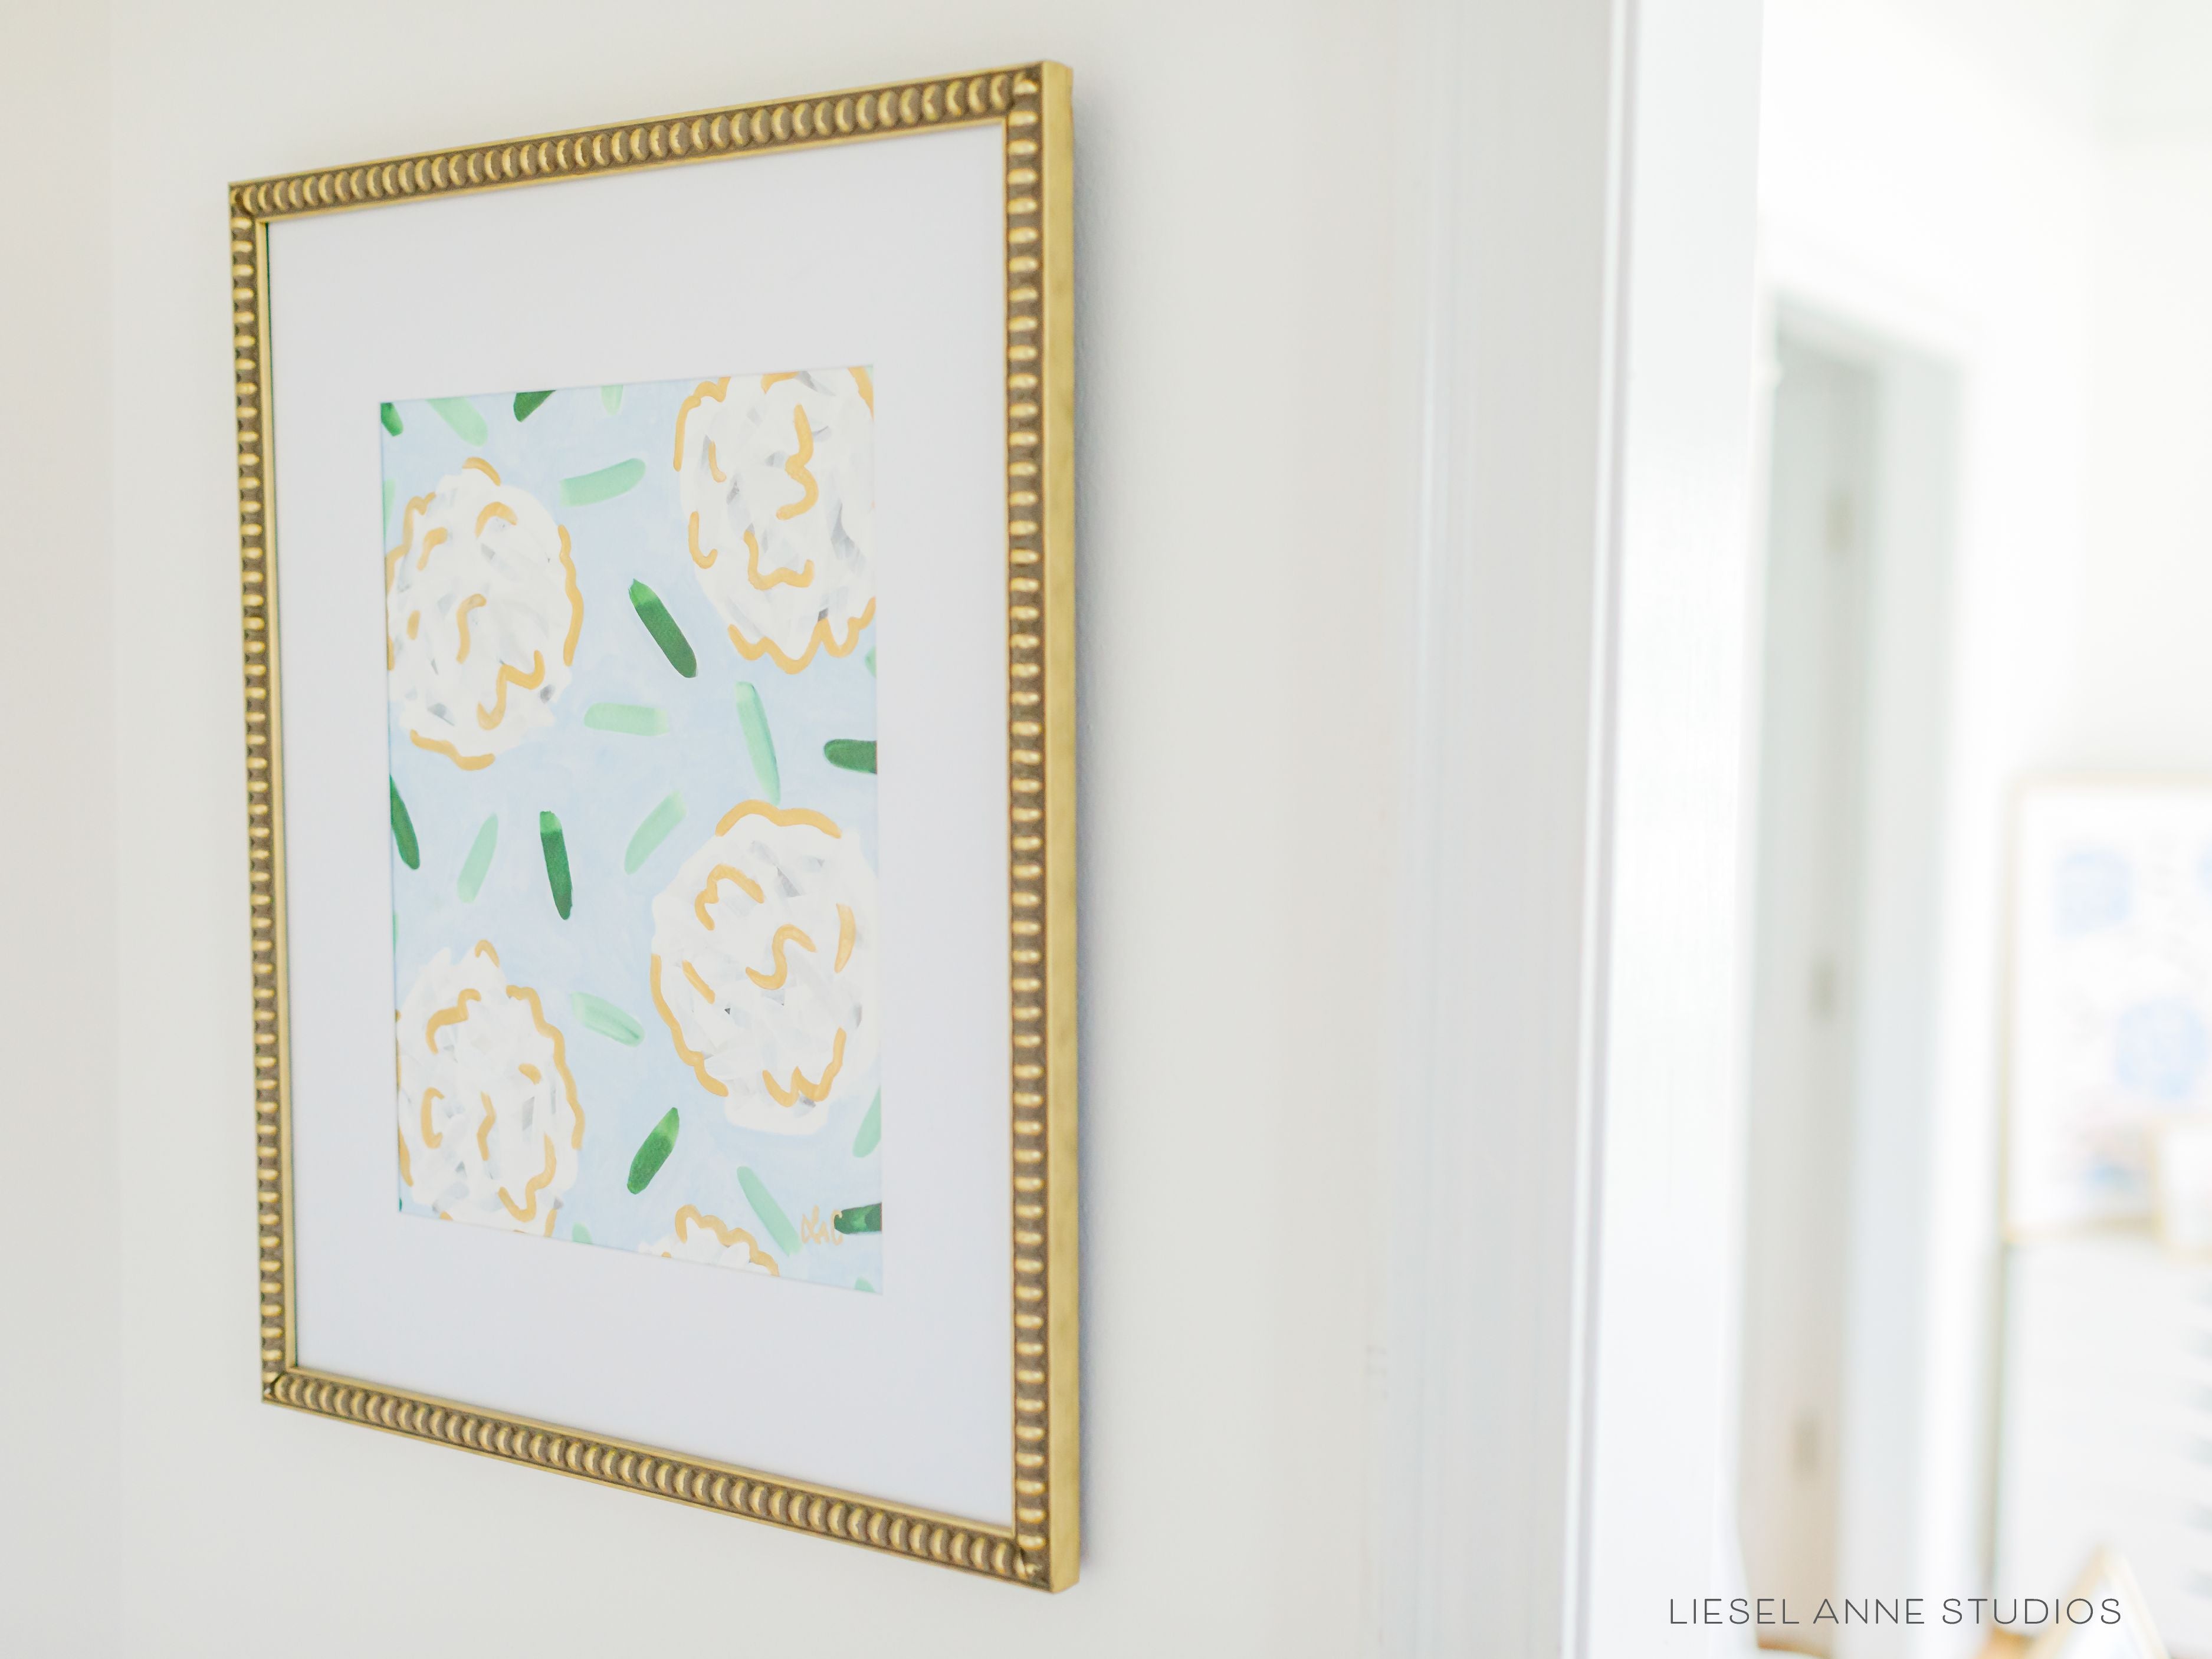 Golden Hydrangea | Blue & White V-Original artwork measures 11"x14" | Hand-Painted with gouache on cold press watercolor paper | Matted and framed in gold wood frame sized 16"x20" | Glare-resistant glass | Hanging hardware included | Features our signature Golden Hydrangea design with a light blue base, white hydrangeas and shimmery gold accents | Initialed in gold by the Liesel Anne (the artist) on the front and signed and dated on the back.-The Singing Little Bird